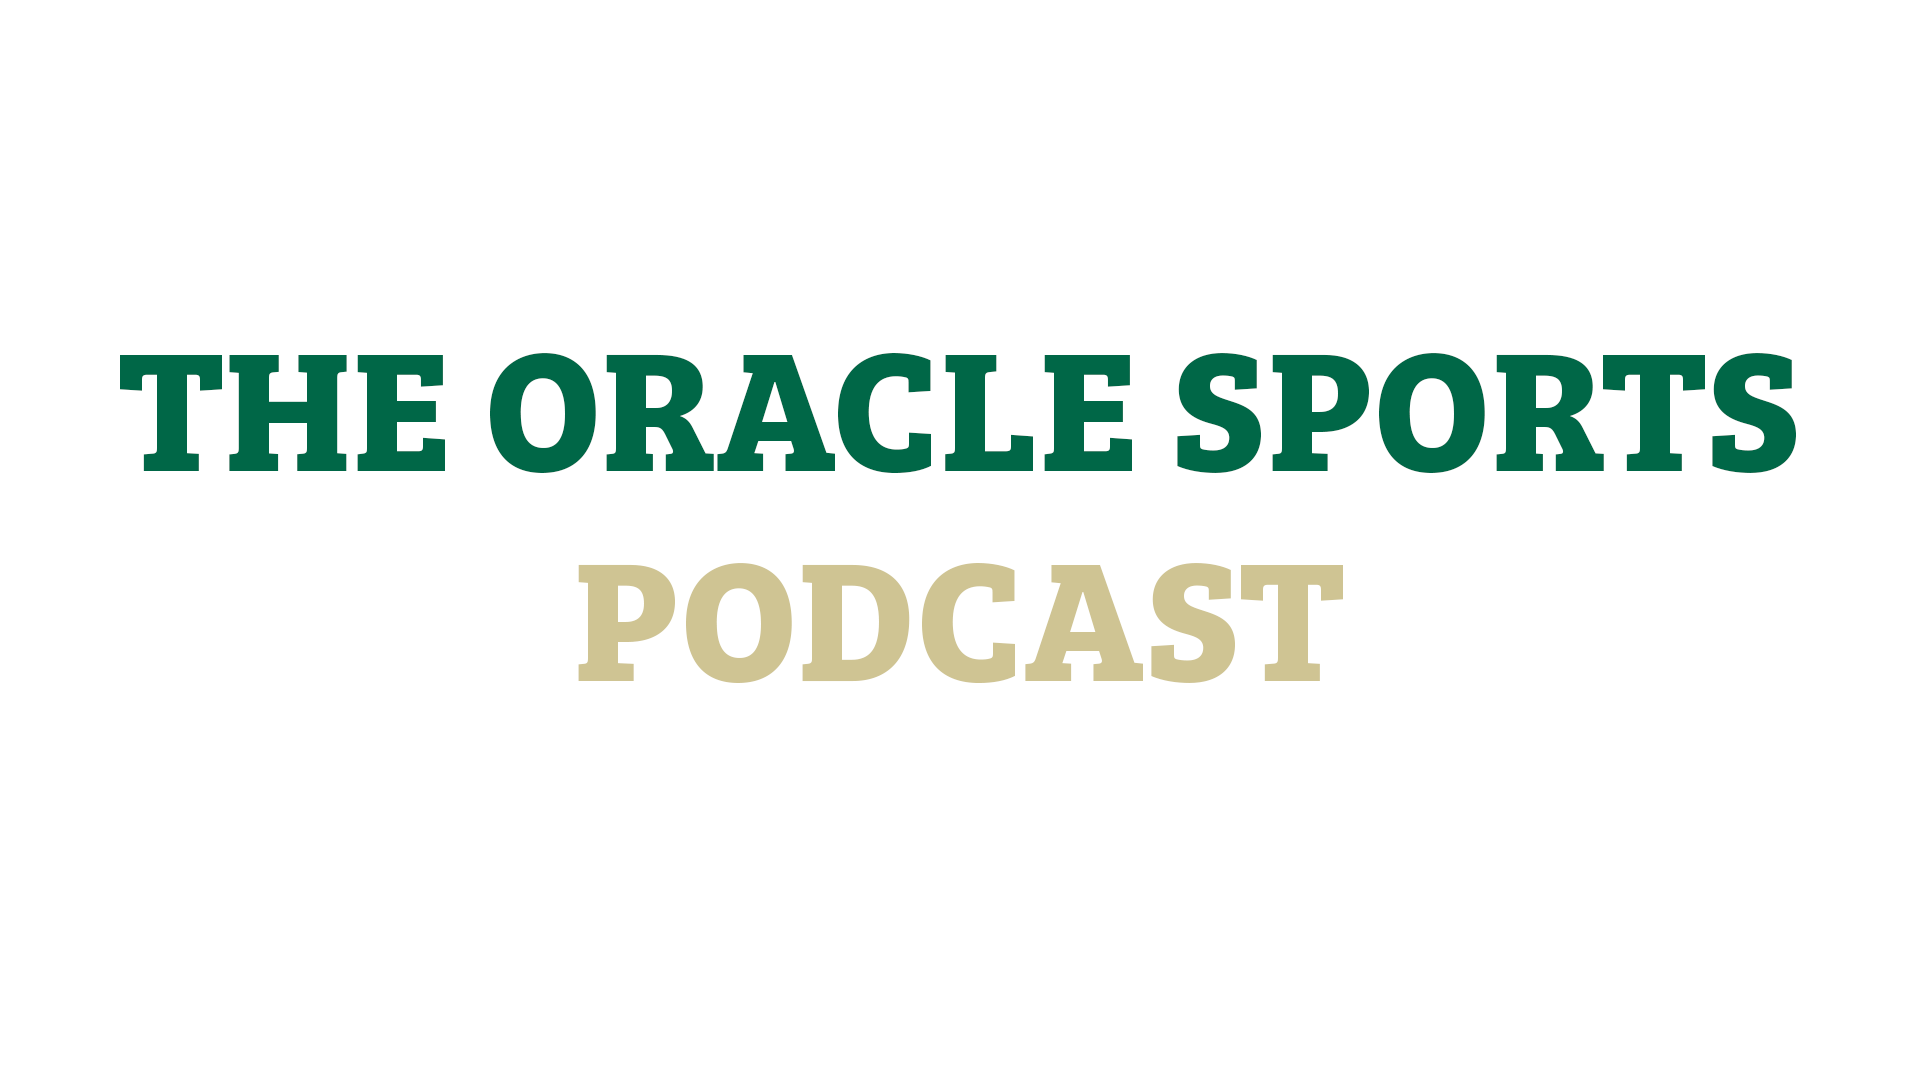 The Oracle Sports Podcast – Denise Schilte-Brown